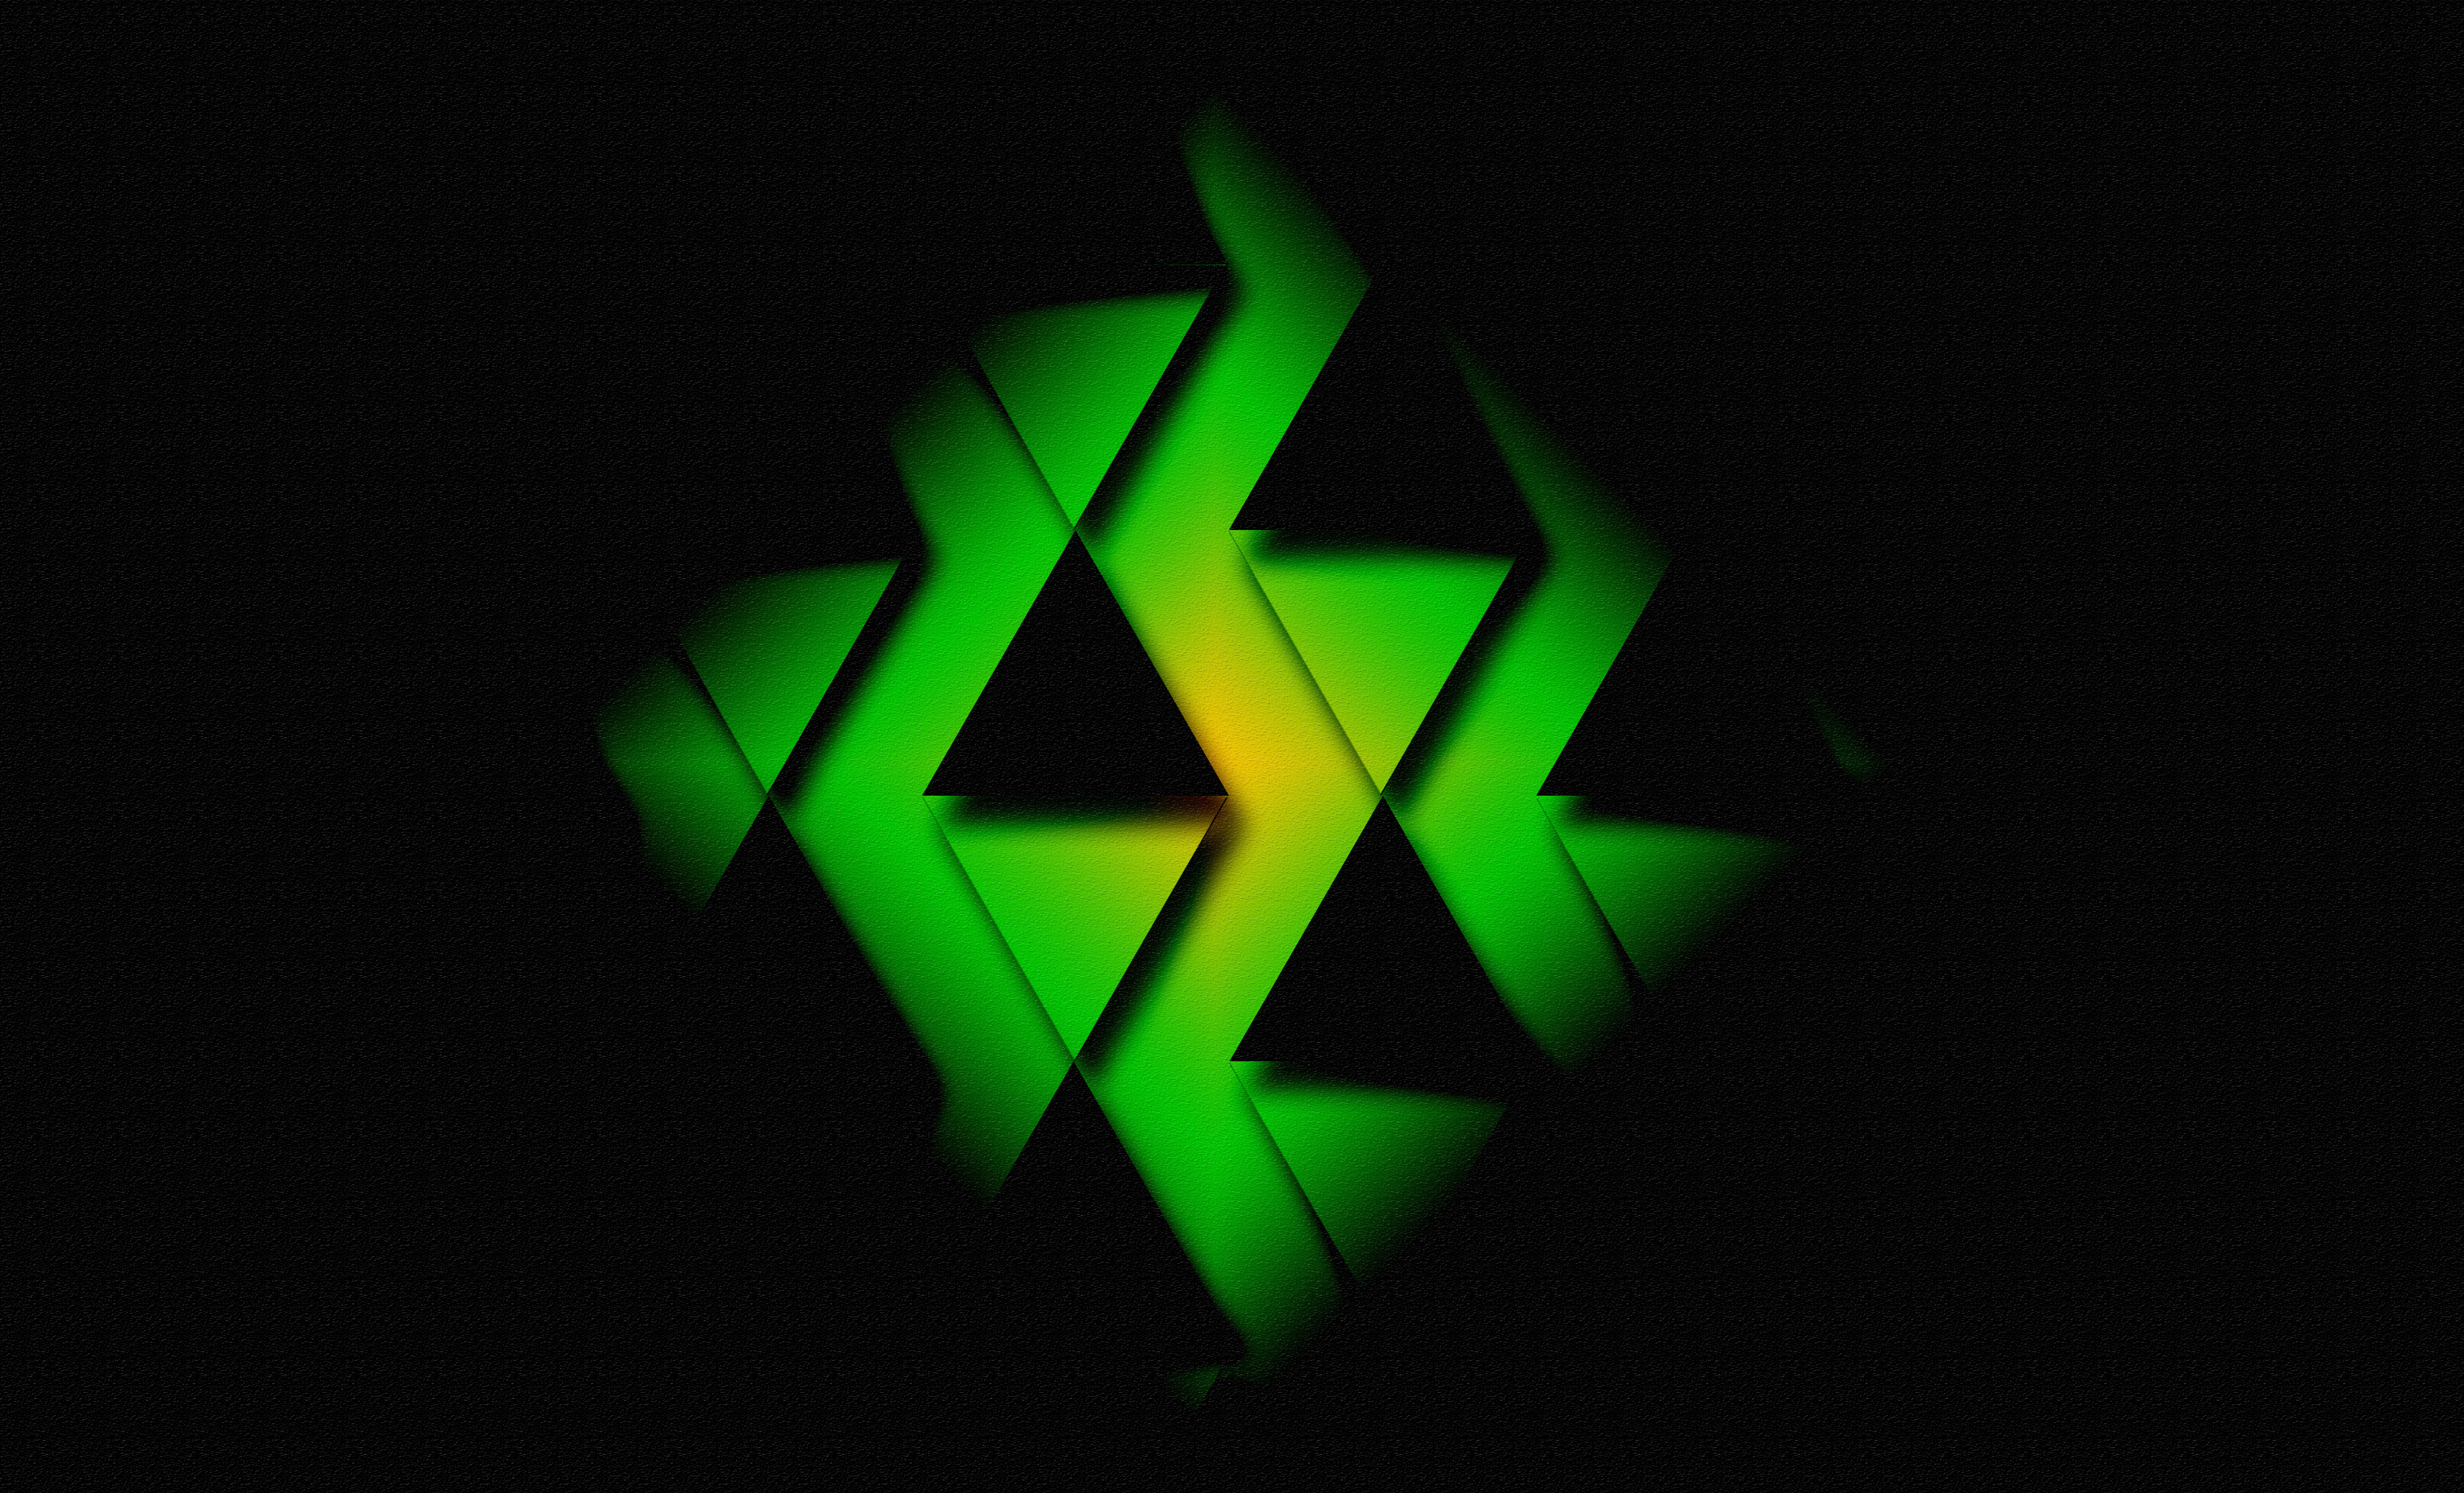 Black And Green Triangle Wallpaper Hd Abstract 4k Wallpapers Images